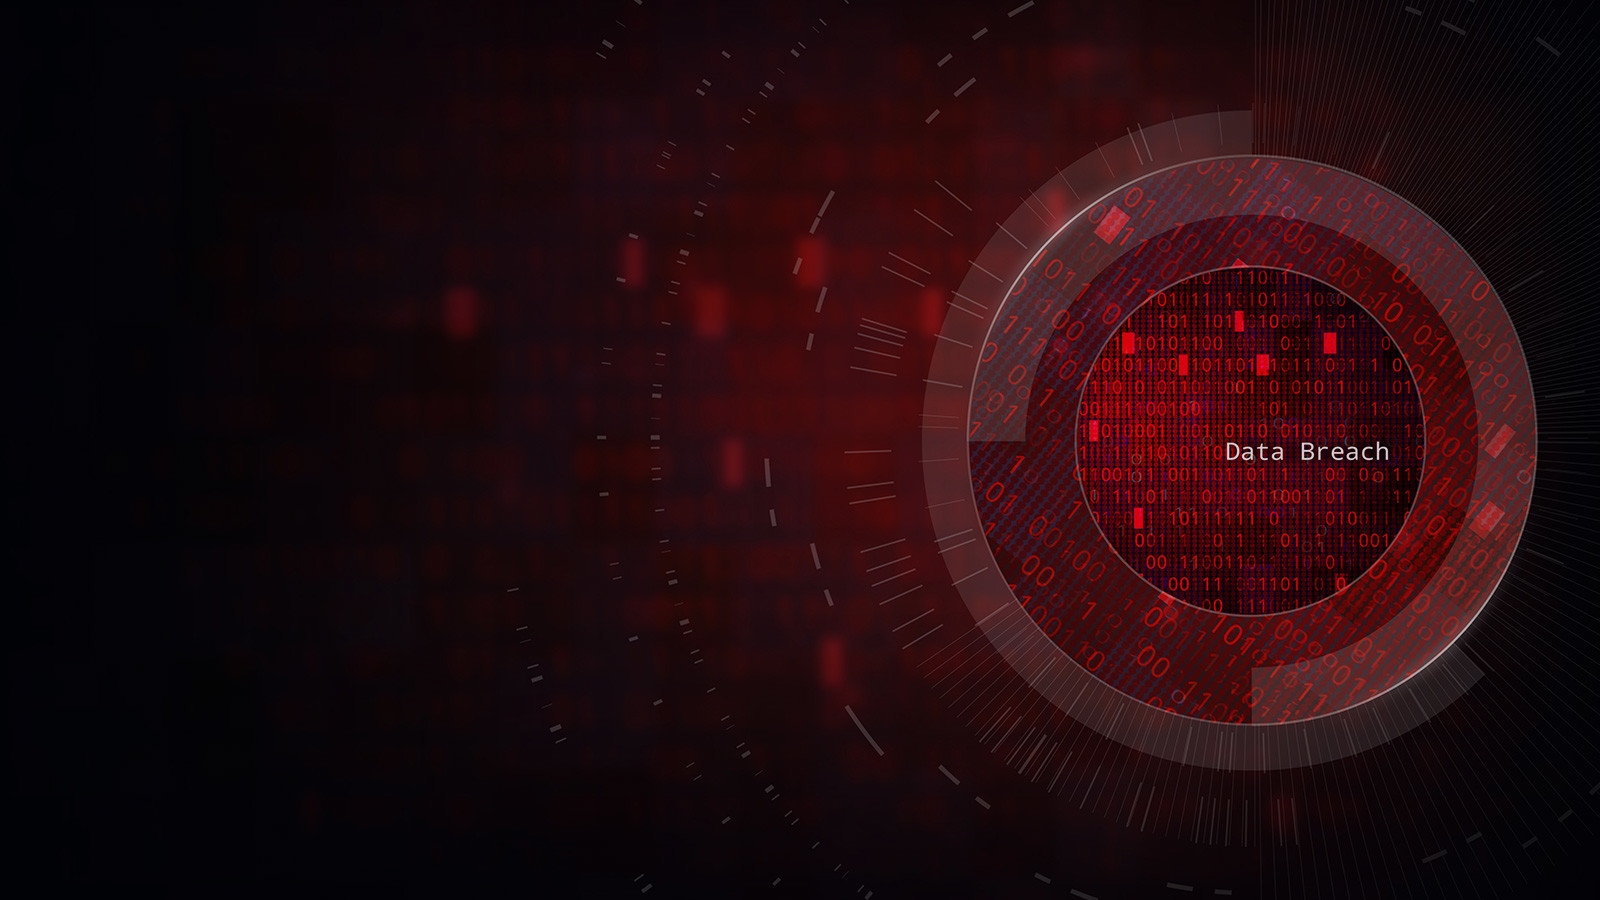 Dark red abstract background with a circle filled with 0s and 1s and "Data Breach" in white